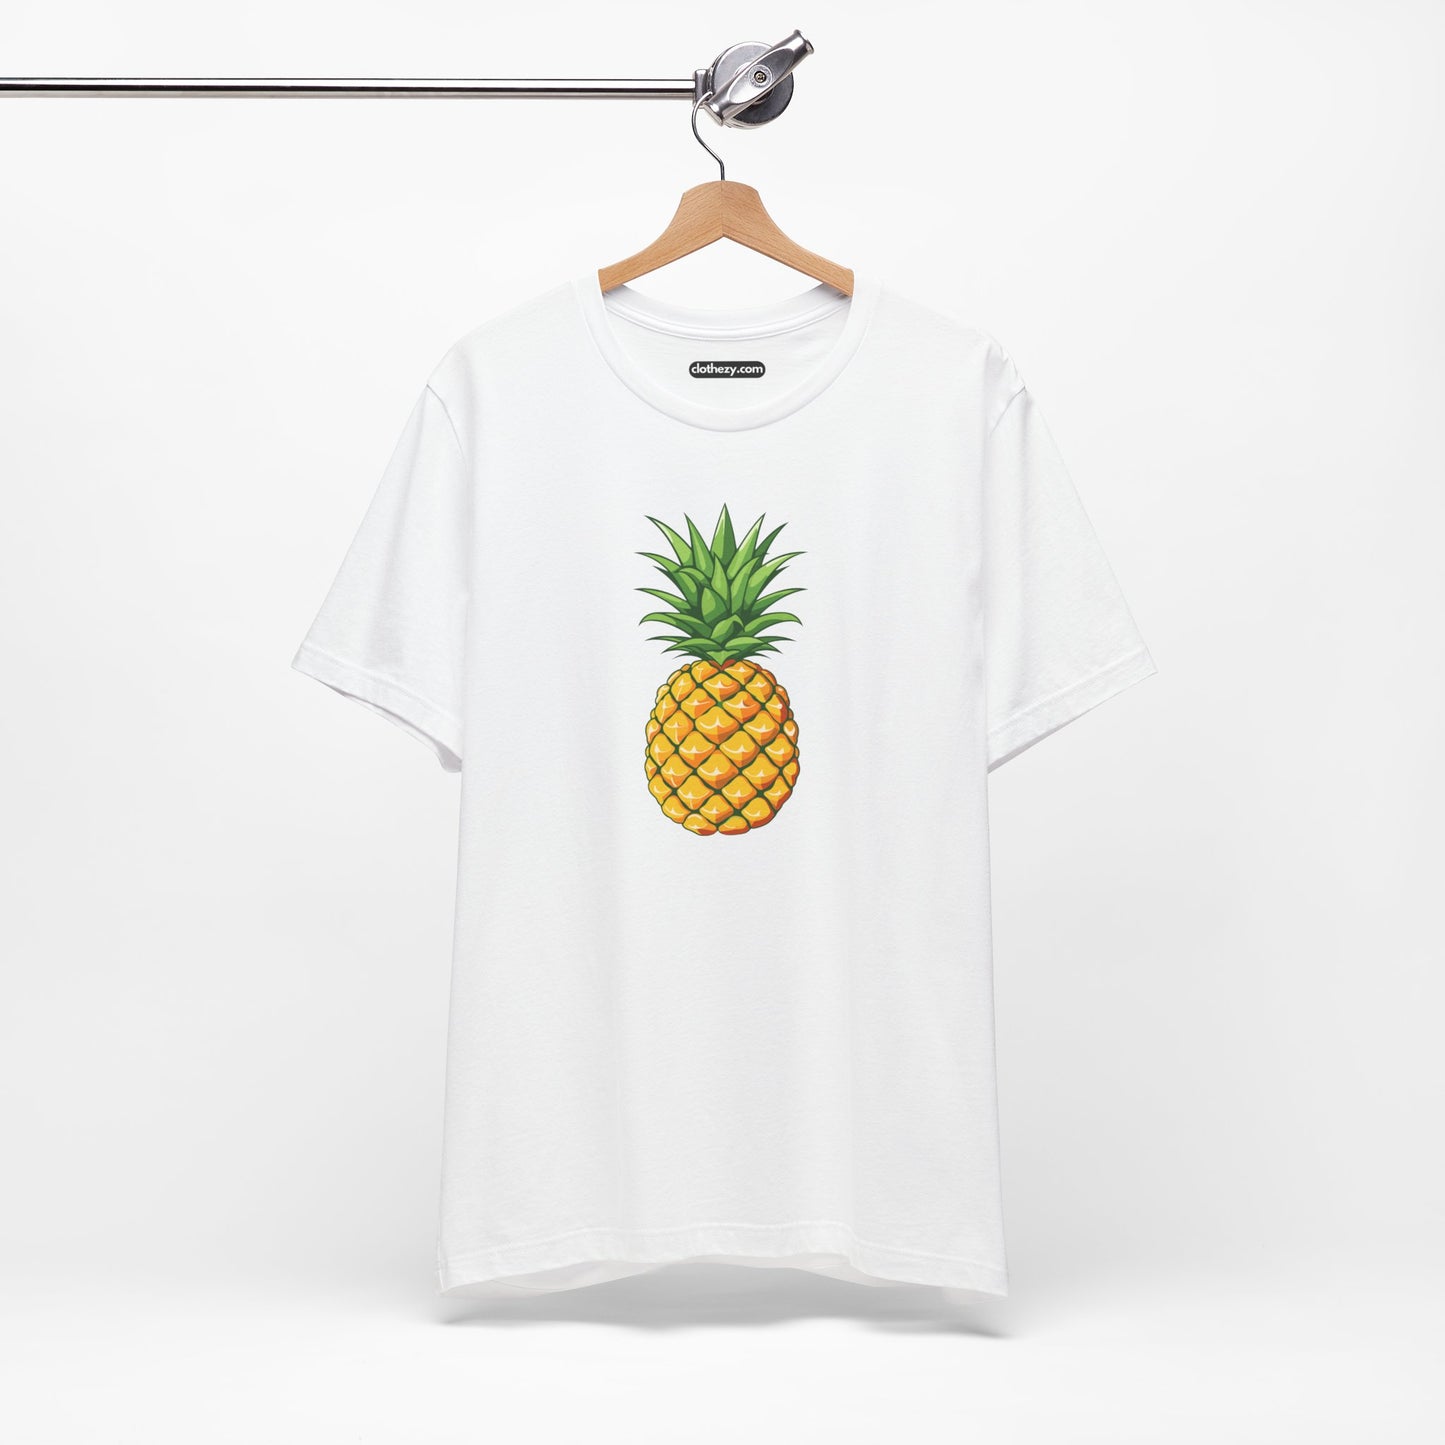 Pineapple - Soft Cotton Adult Unisex T-Shirt, Gift for friends and family, Gift for friends and family by clothezy.com - Buy Now